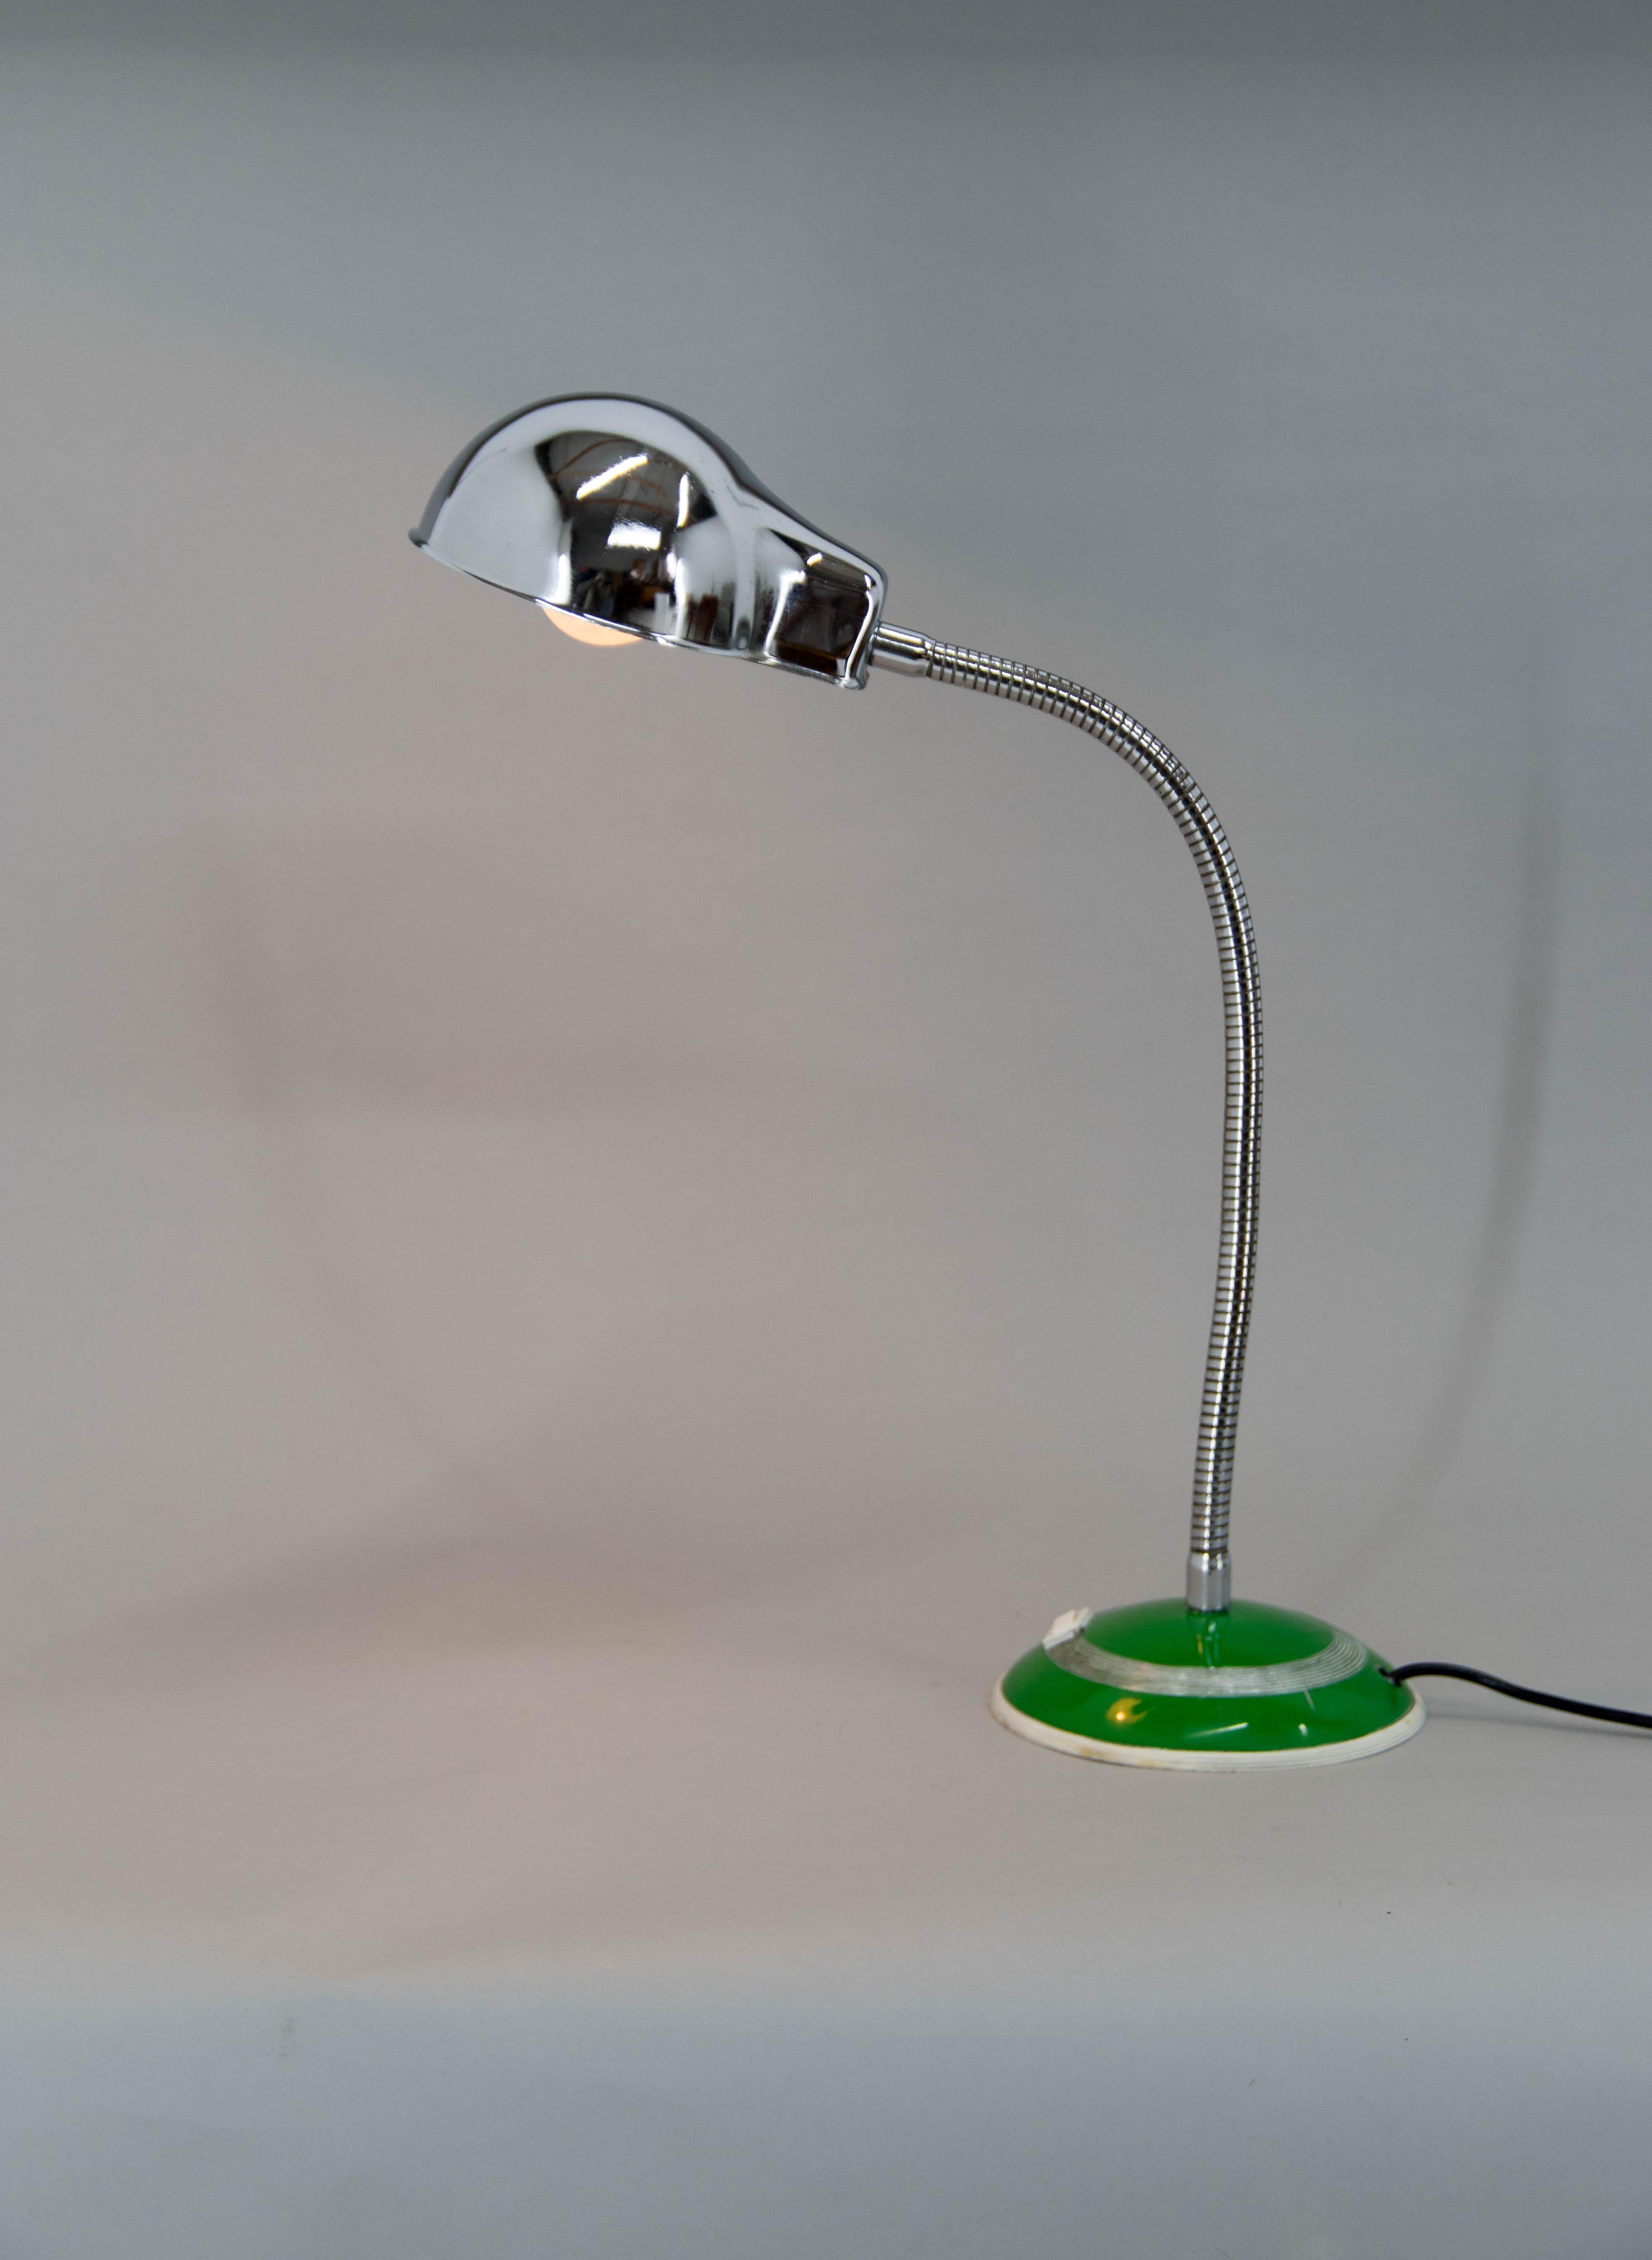 Table lamp with flexible shade made in 1950s
Very good original condition.
1x40W, E25-E27 bulb
US plug adapter included.
 